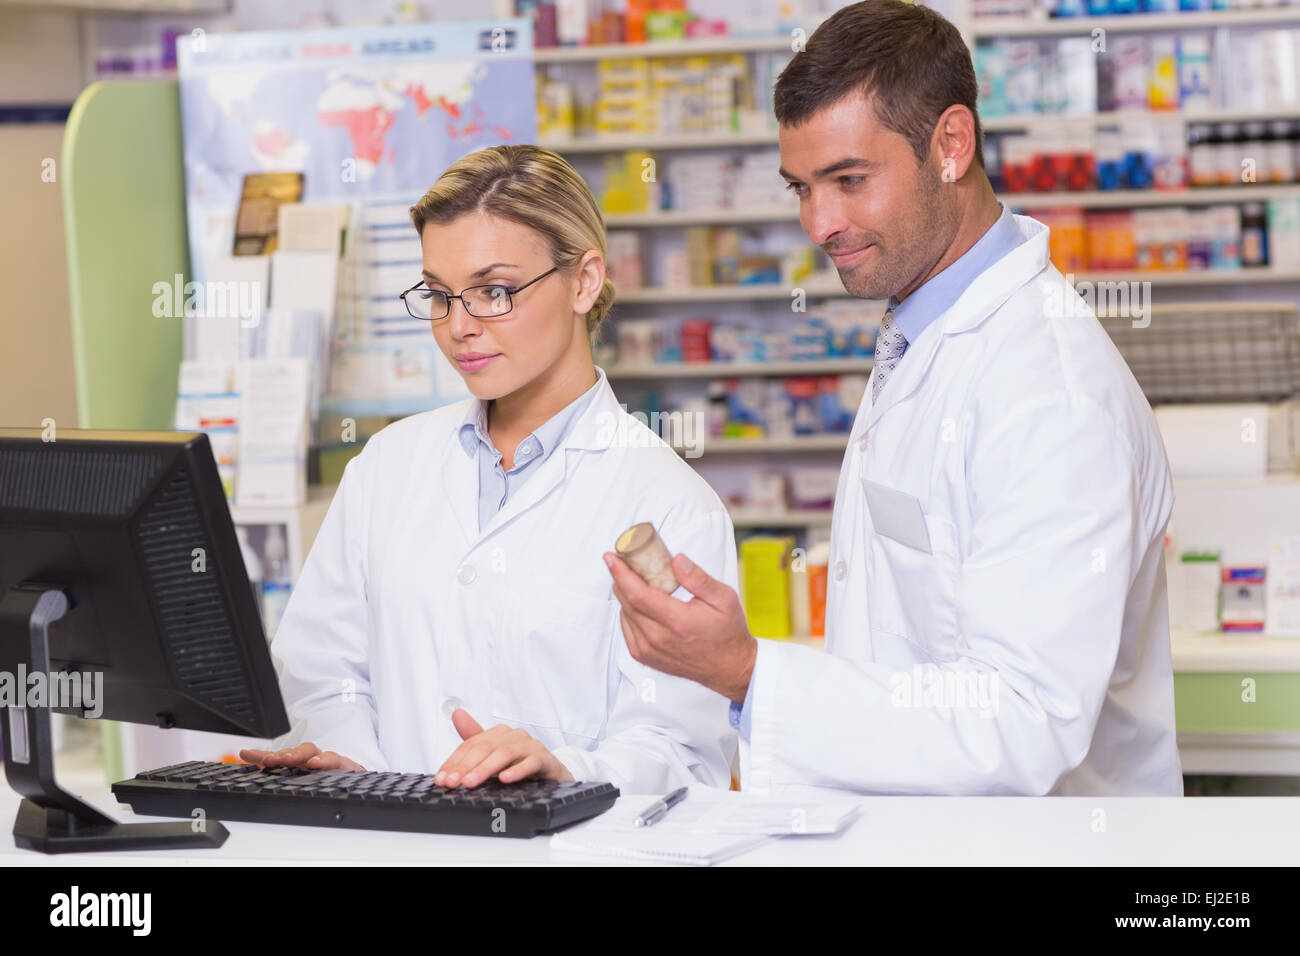 Team of pharmacists looking at the computer Stock Photo